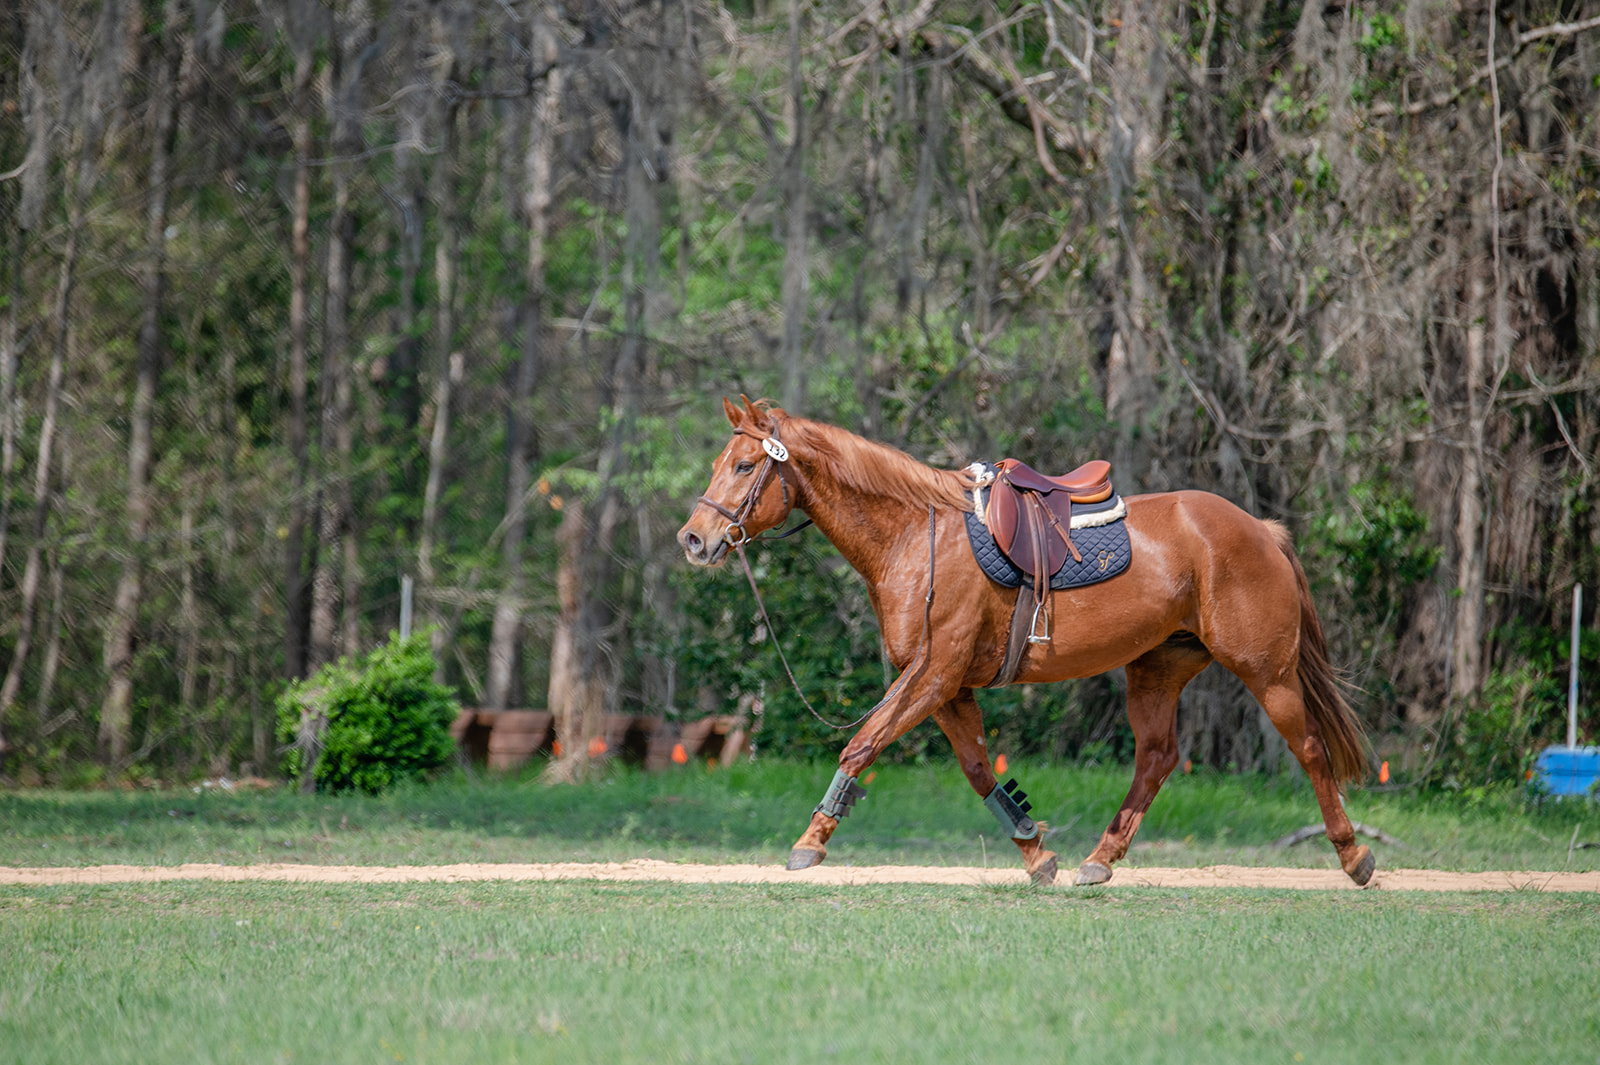 Behind the Scenes from Eventing competition in Tallahassee, FL at Mahan Farm. calicoandchrome.com